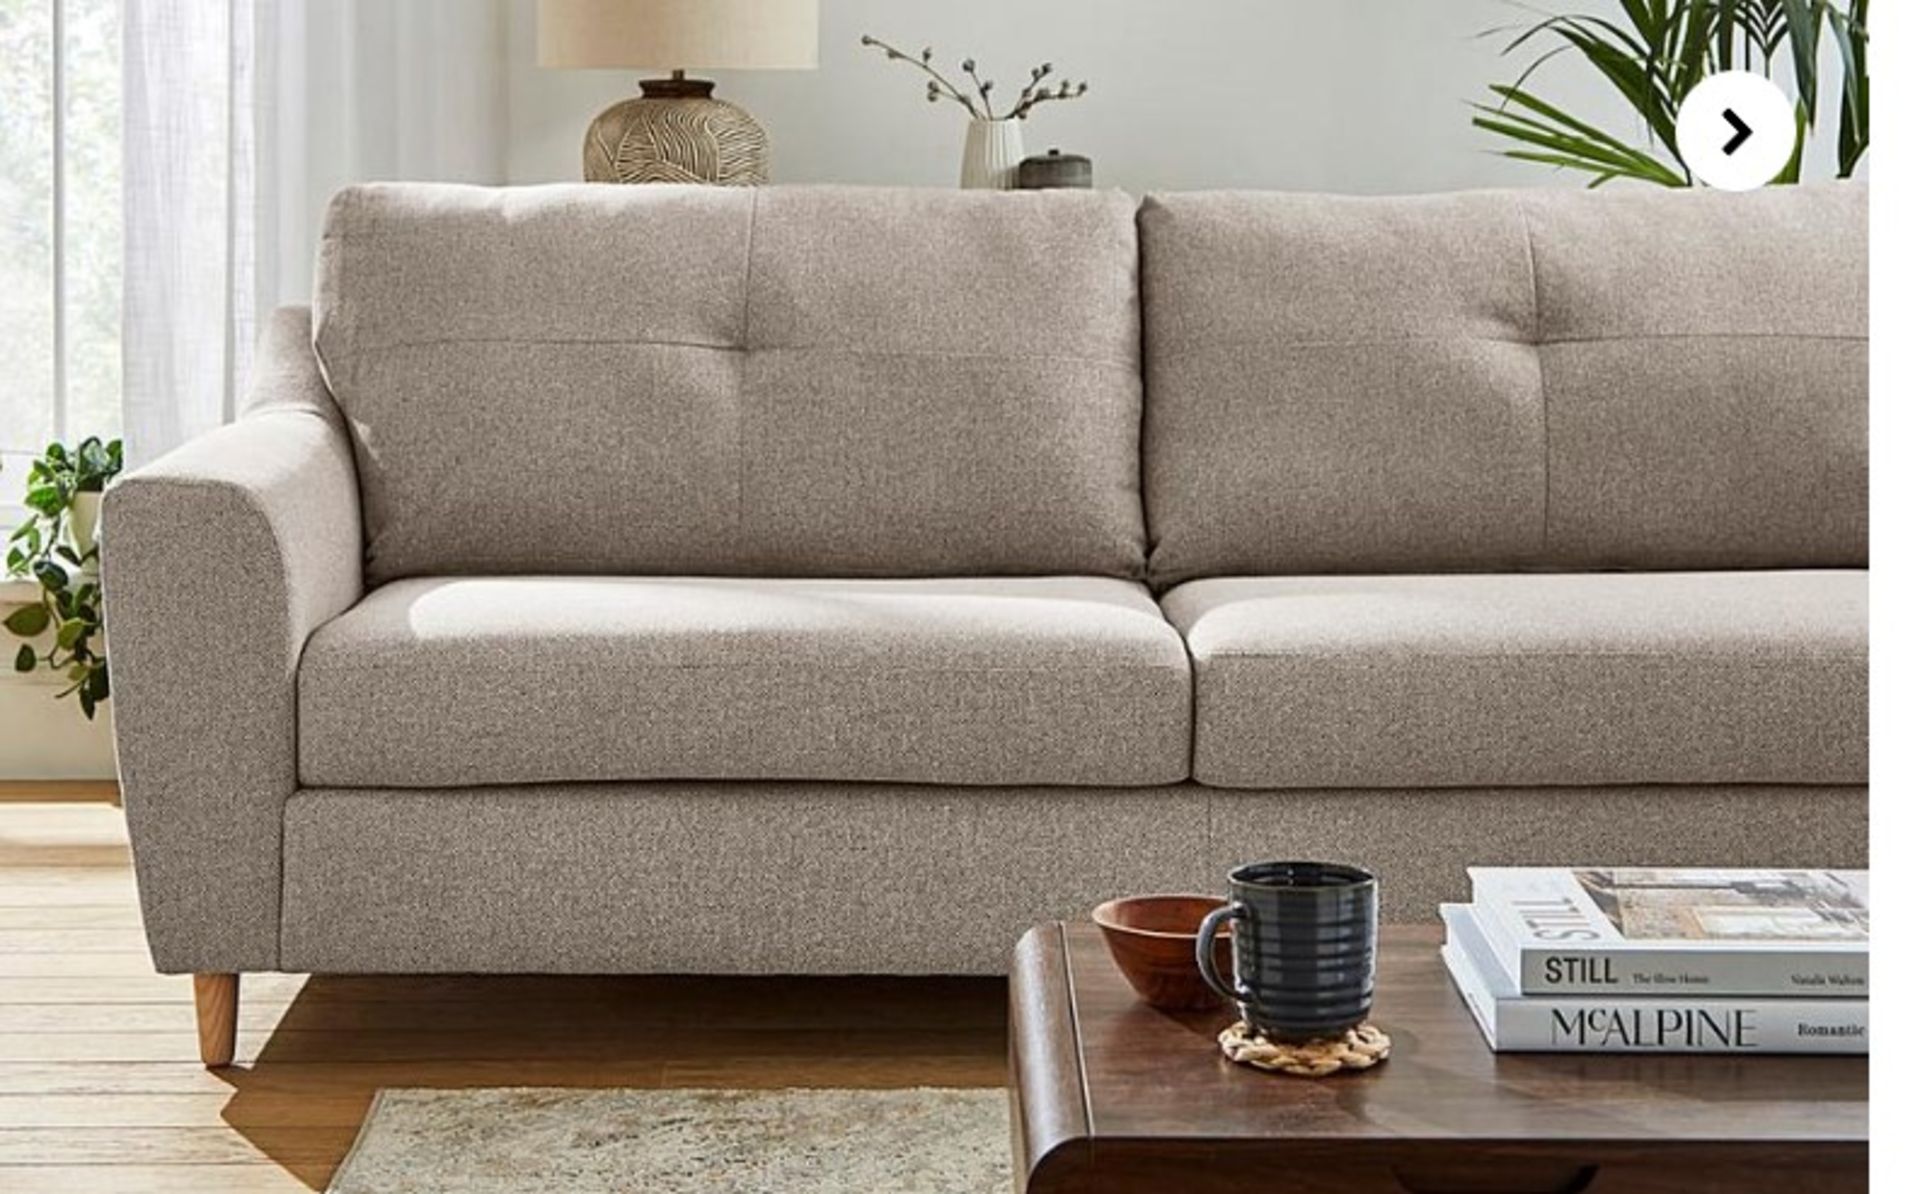 Baxter 4 Seater Sofa. - ER23. RRP £749.00. The contemporary style of the Baxter range is both on- - Image 2 of 2